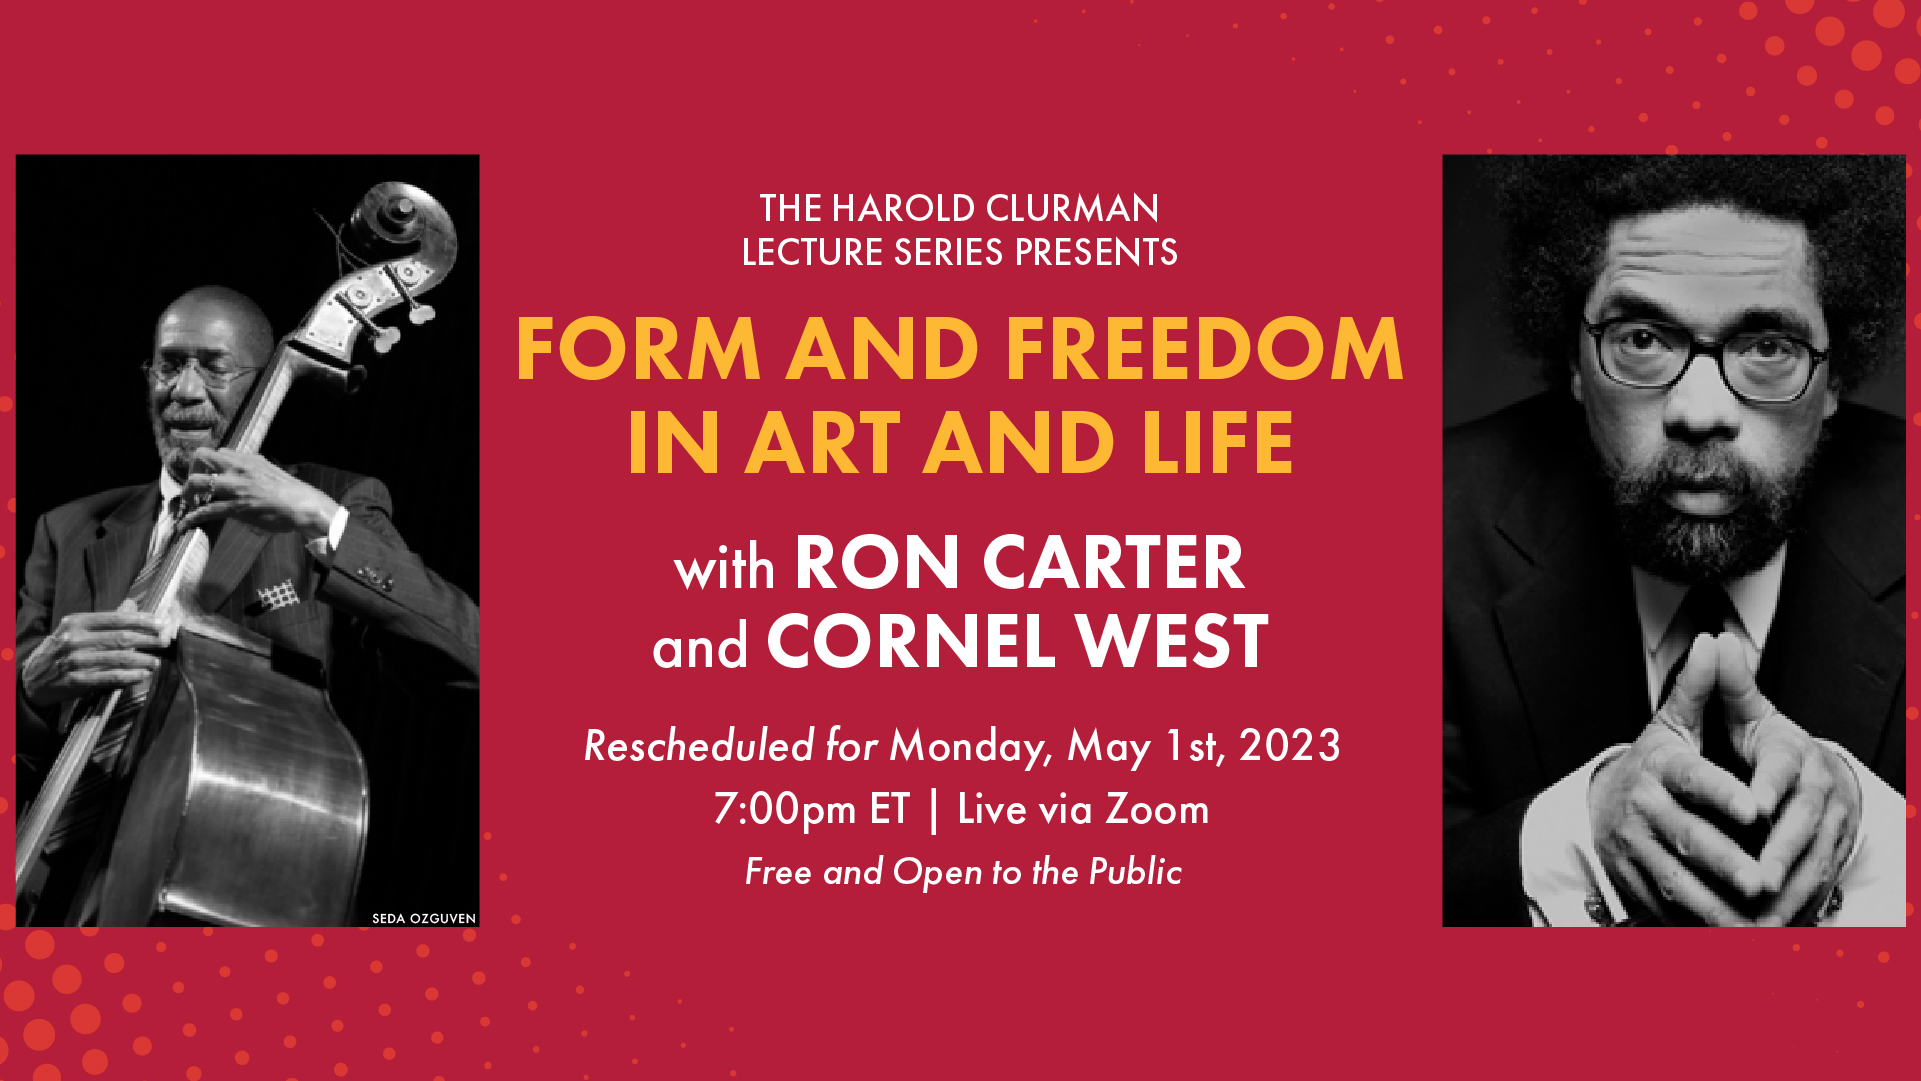 Form and Freedom in Art and Life with Ron Carter and Cornel West - Monday May 1st at 7 PM via Zoom